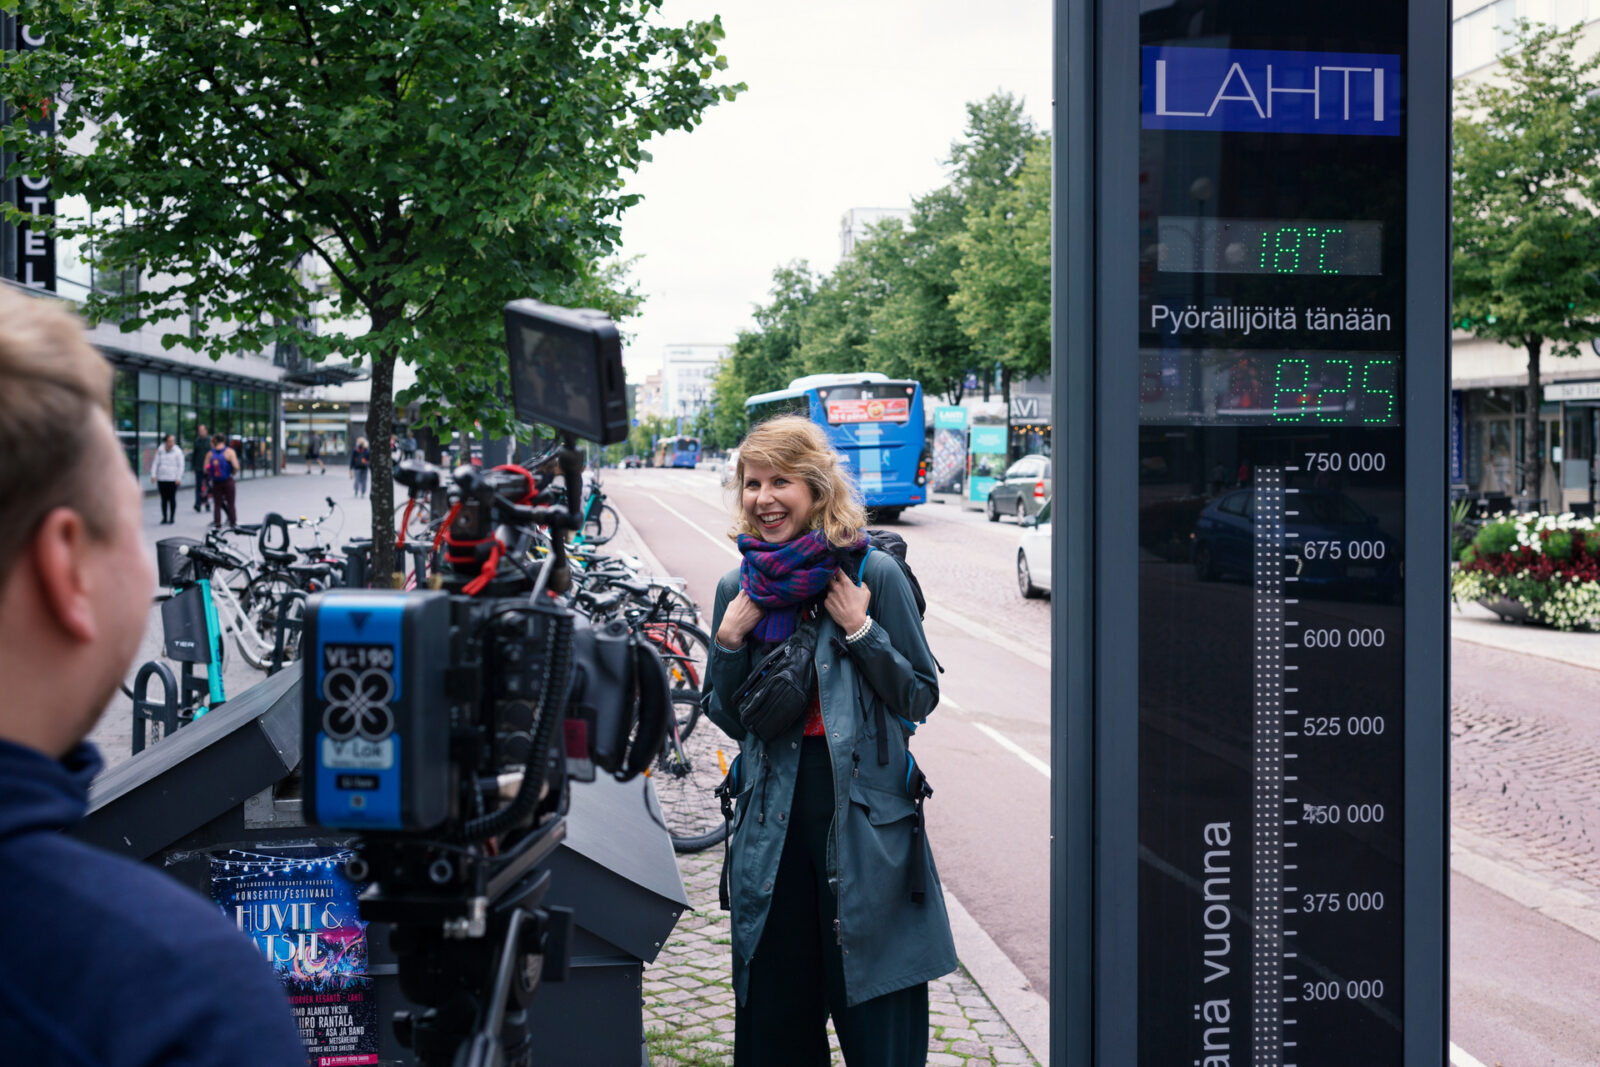 Anna Huttunen is giving an interview next to the counter that measures the number of cyclists